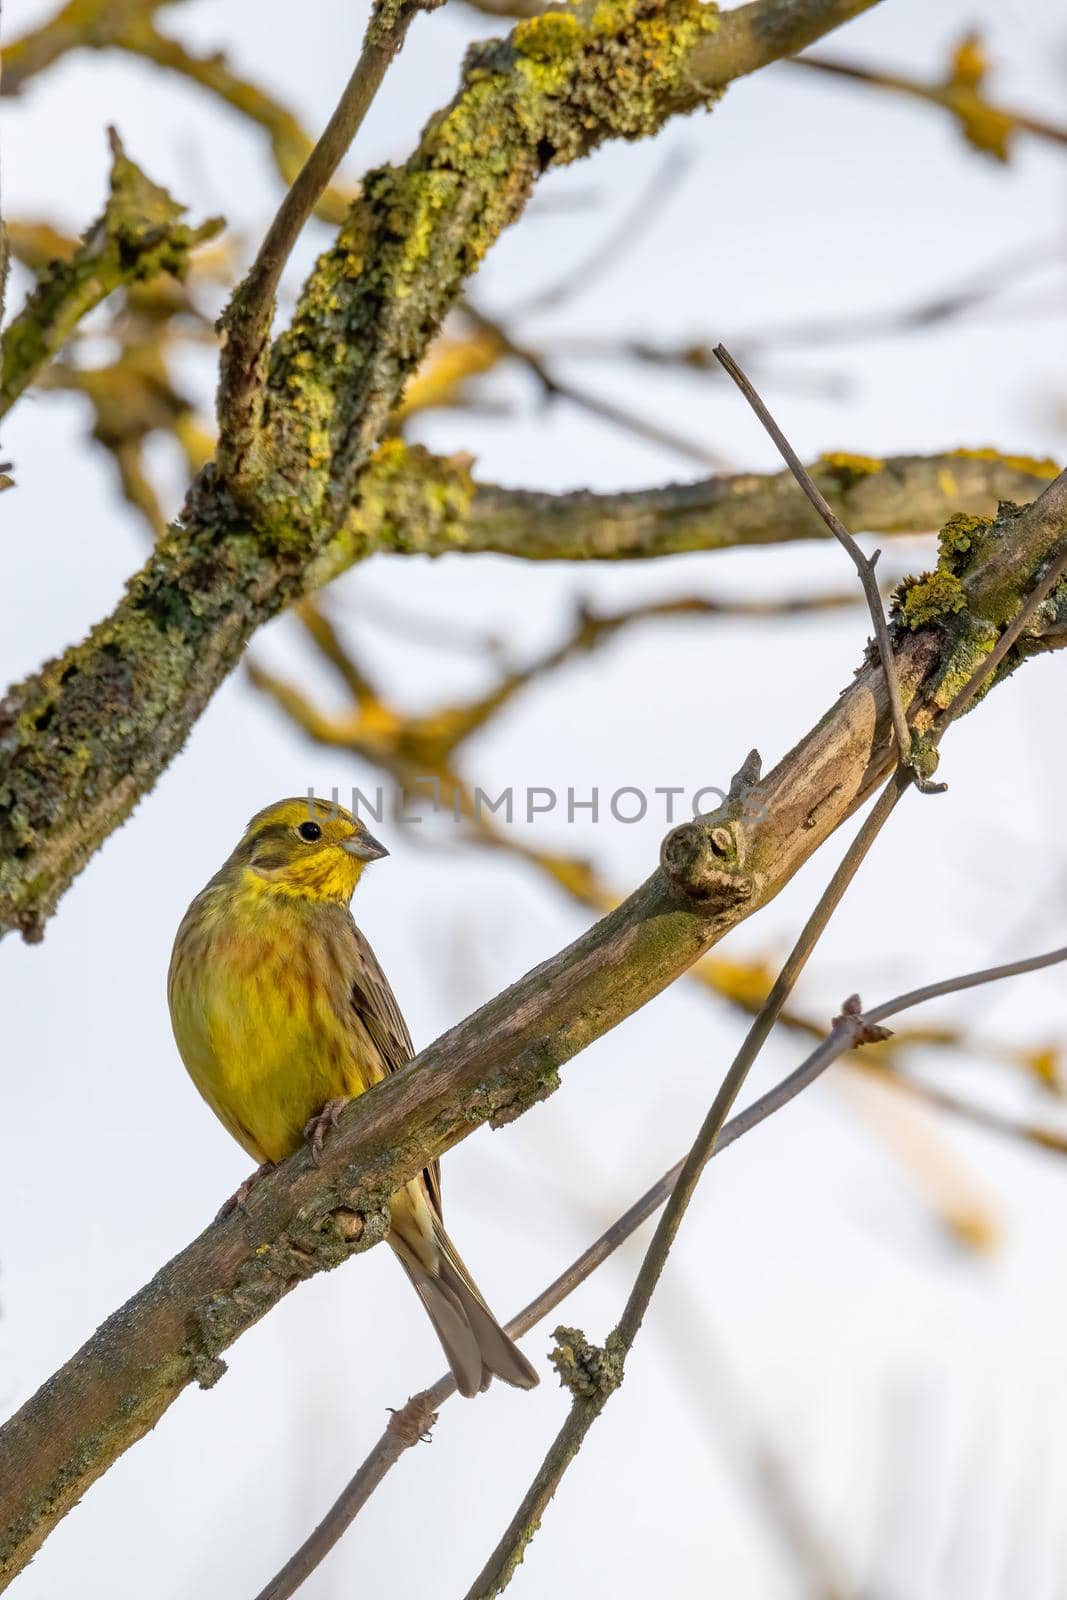 yellowhammer in spring, Emberiza citrinella, is a passerine bird in the bunting family that is native to Eurasia. Springtime in Czech Republic, Europe wildlife